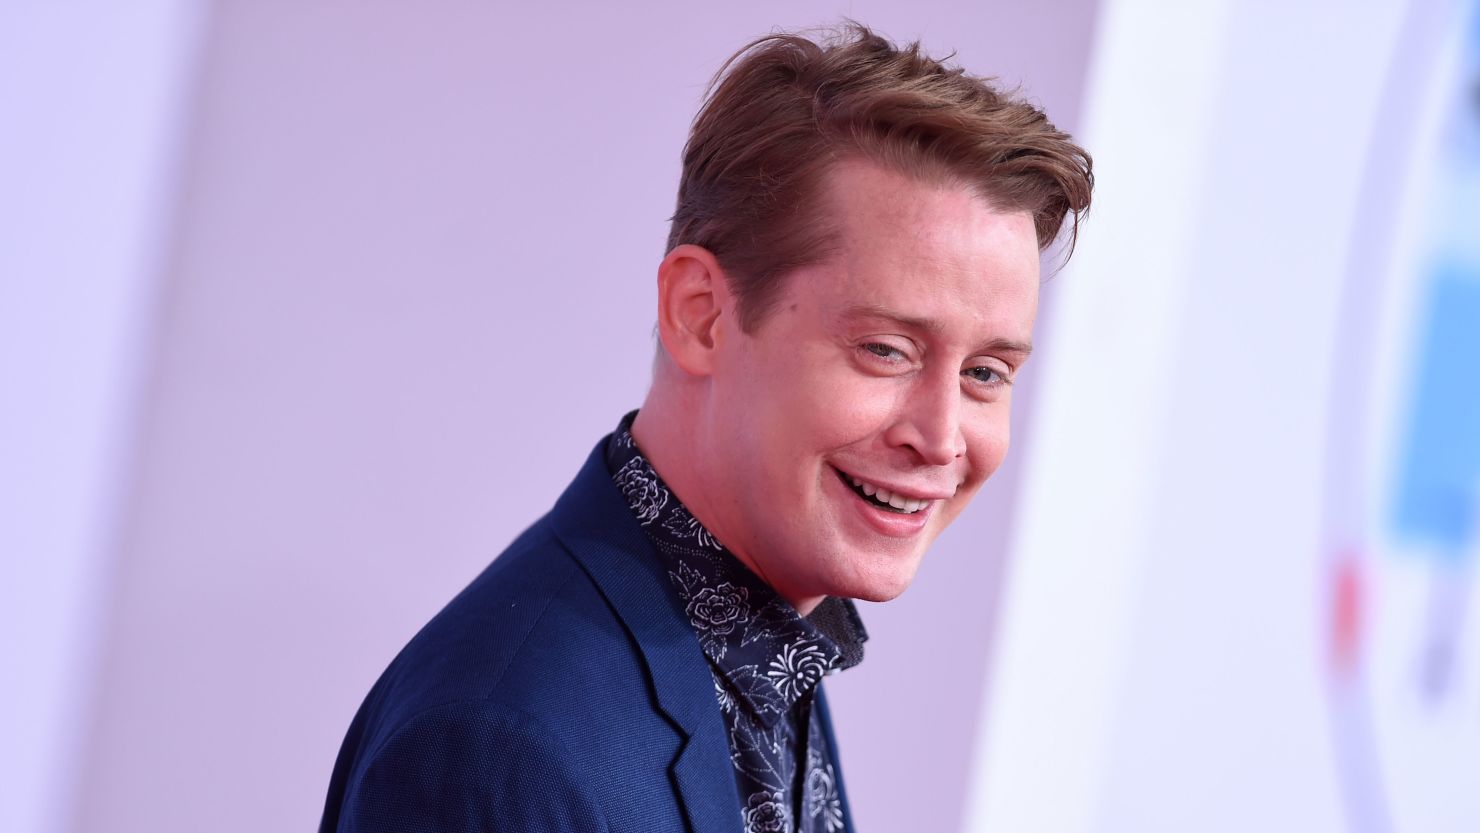 Macaulay Culkin referenced turning 41 years old in a tweet about his debut on "American Horror Story."